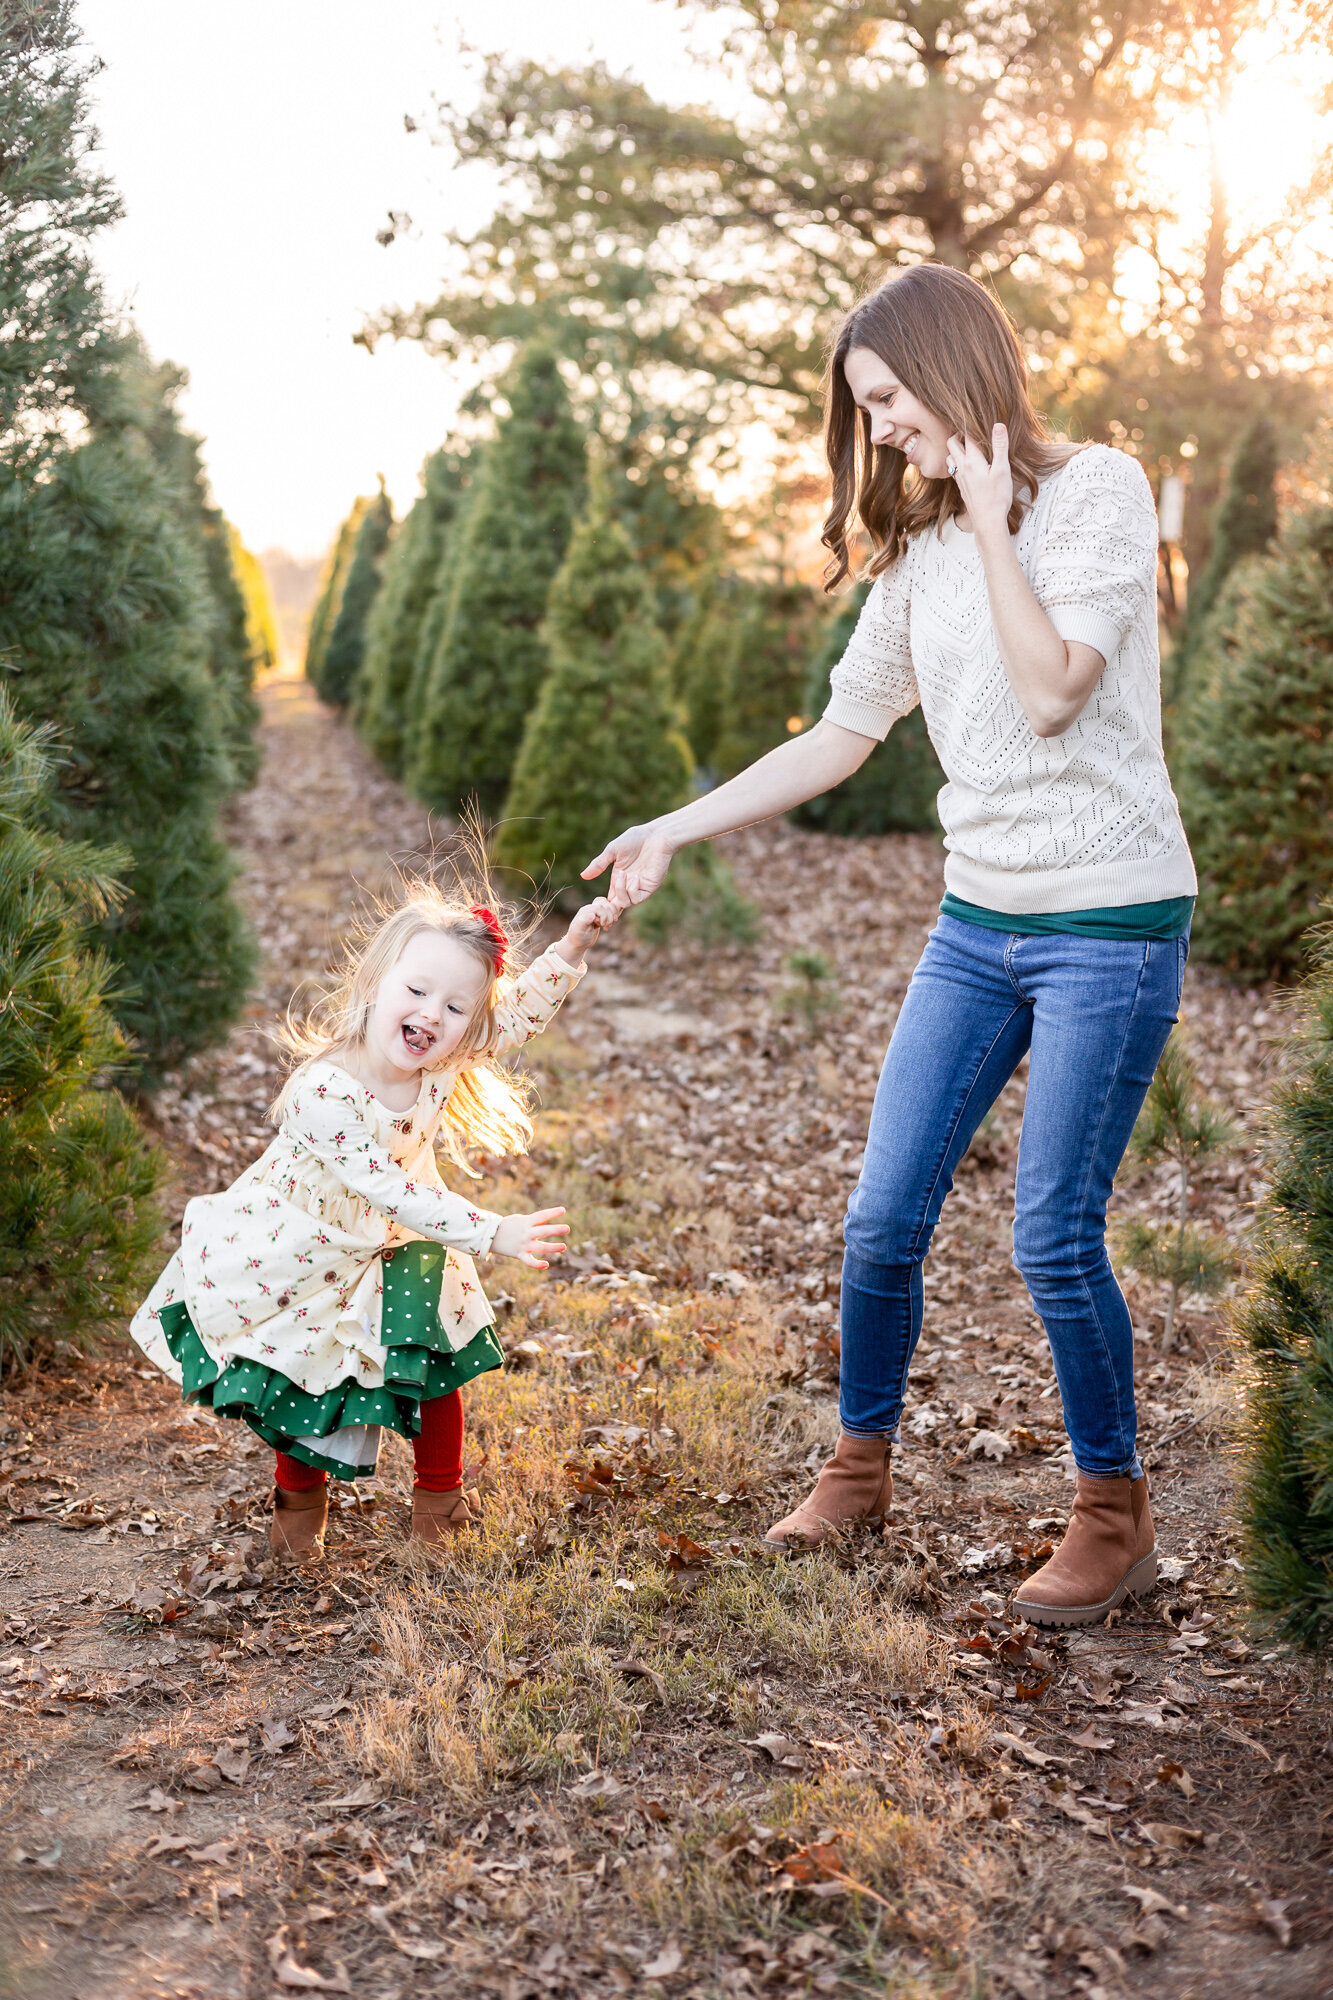 Outdoor-family-lifestyle-photography-session-Lexington-KY-photographer-golden-hour-tree-farm-sessions-2